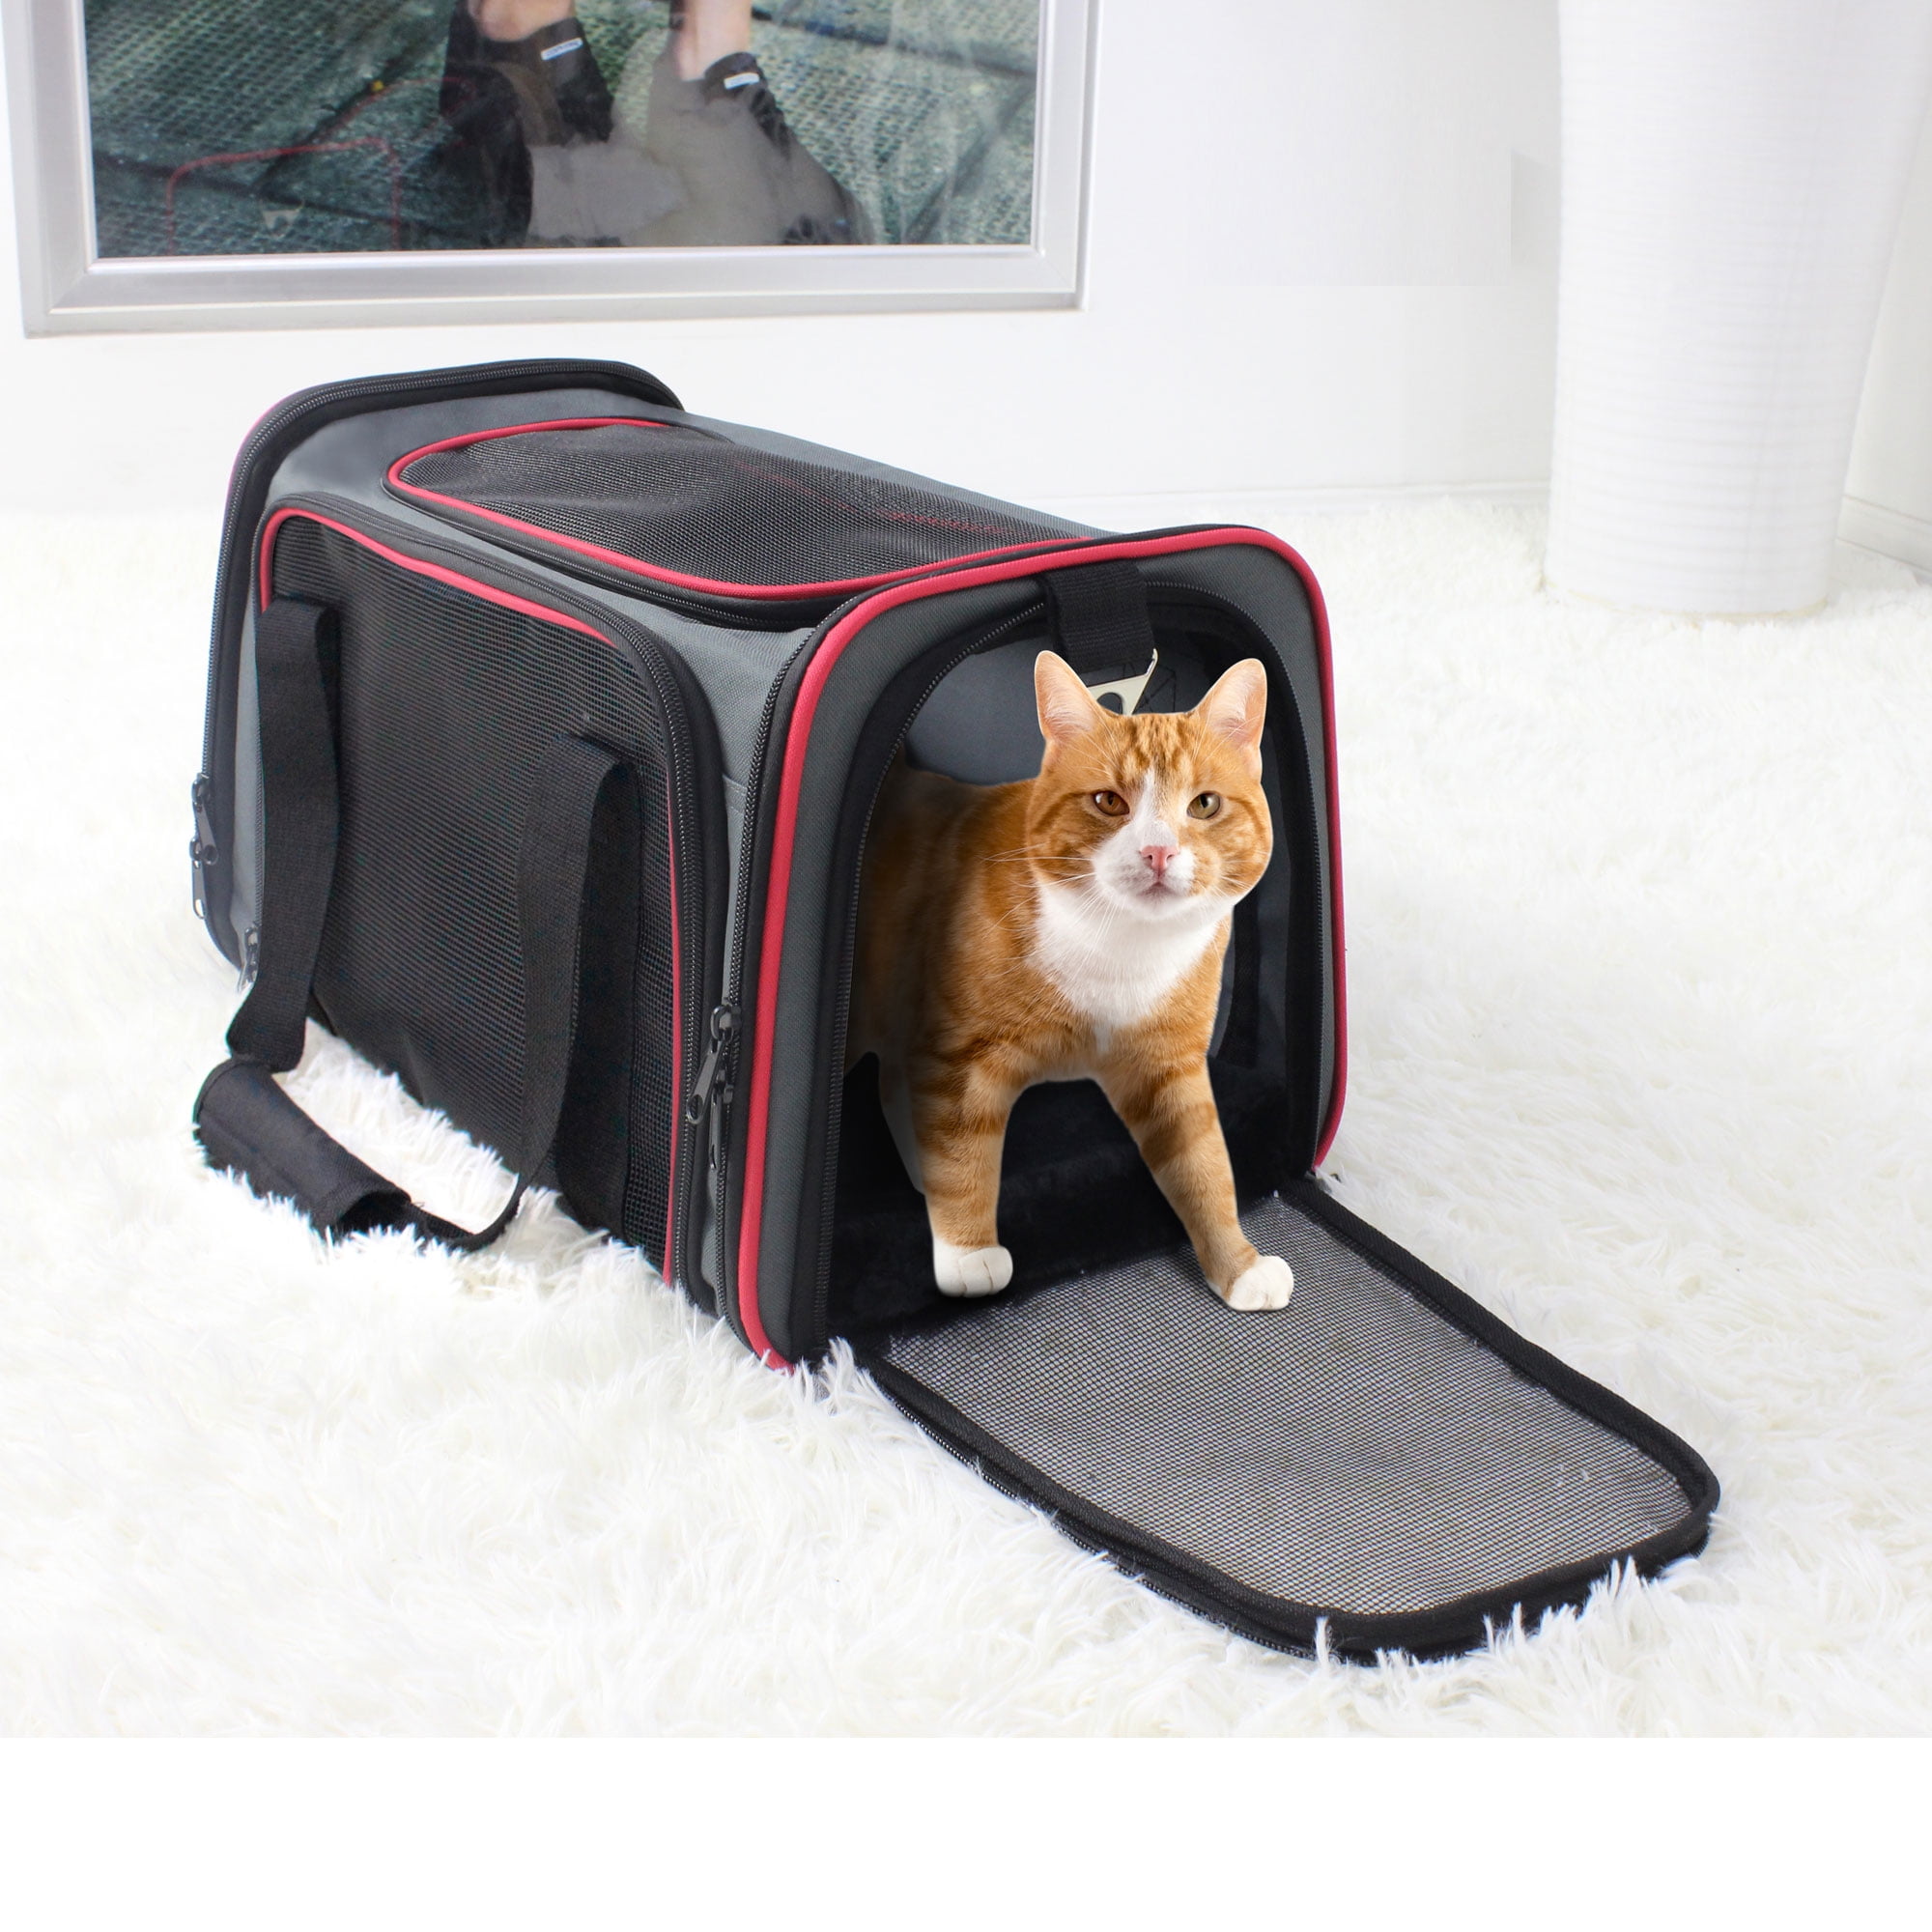 WDM Airline Approved, Soft Sided Collapsible Pet Carrier Black/Gray Large